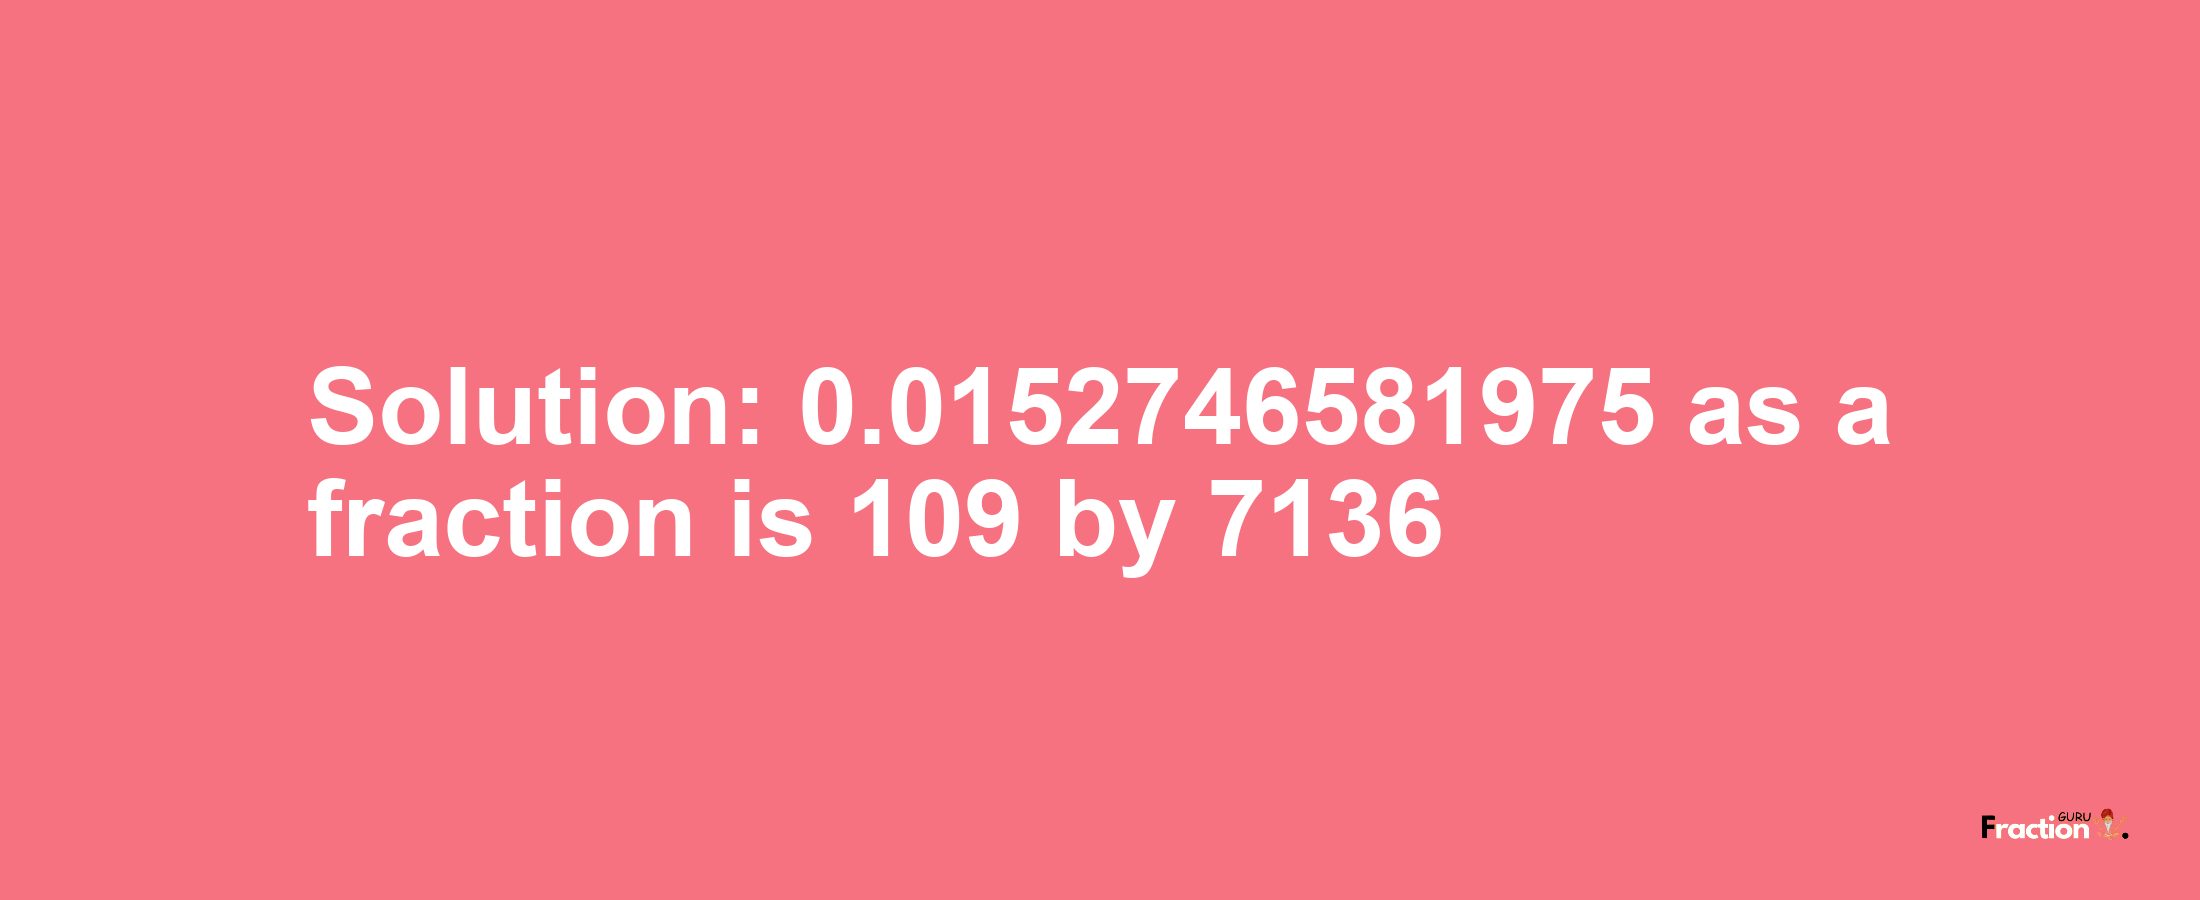 Solution:0.0152746581975 as a fraction is 109/7136